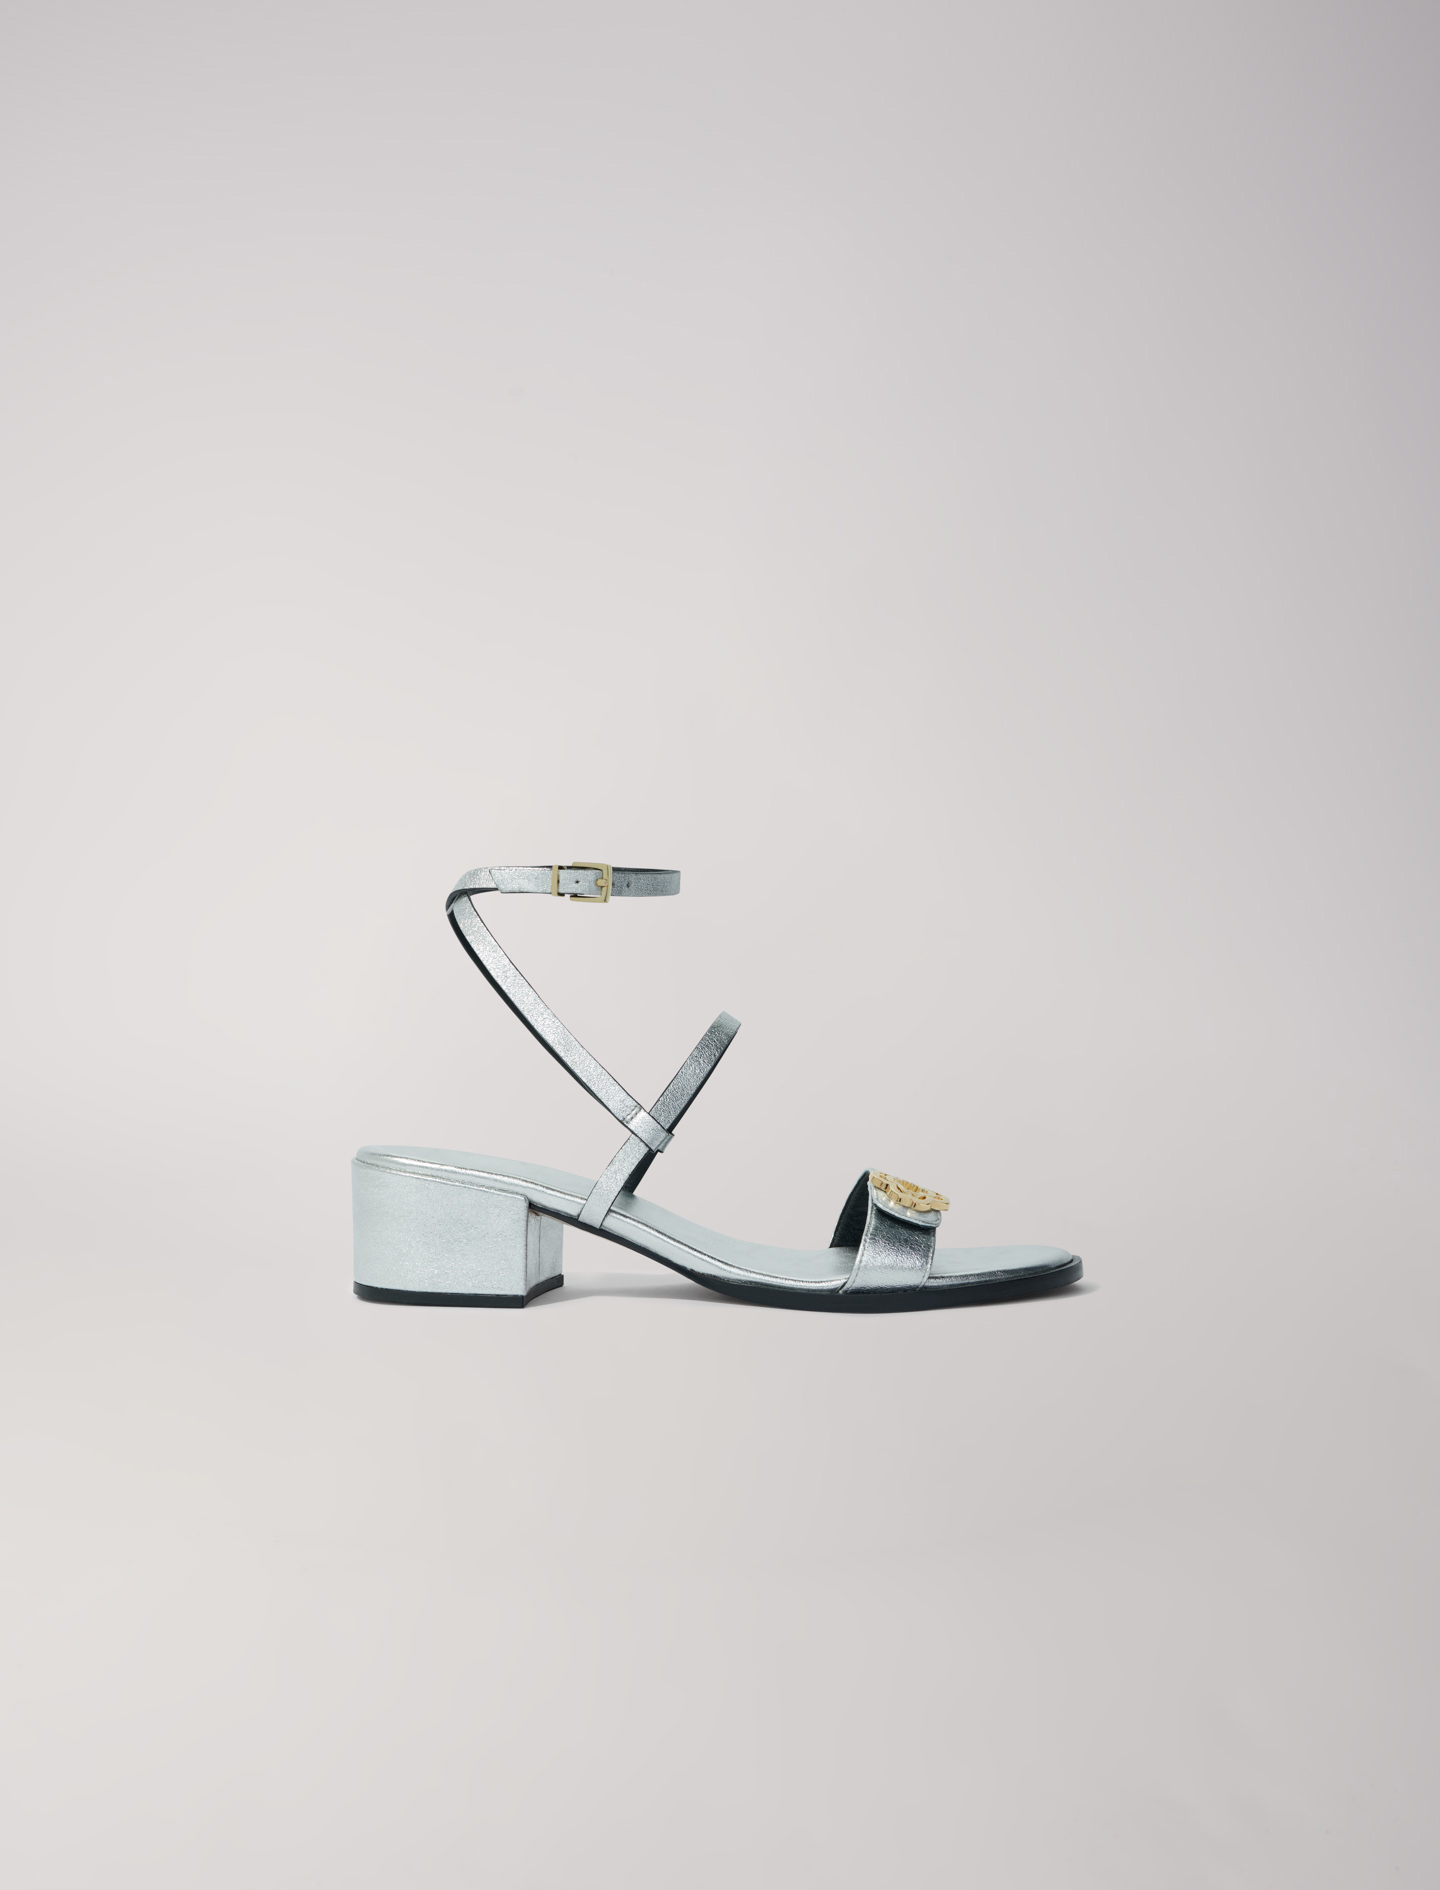 Maje Woman's zinc Appliqué: Leather strappy sandals for Spring/Summer, in color Silver / Grey